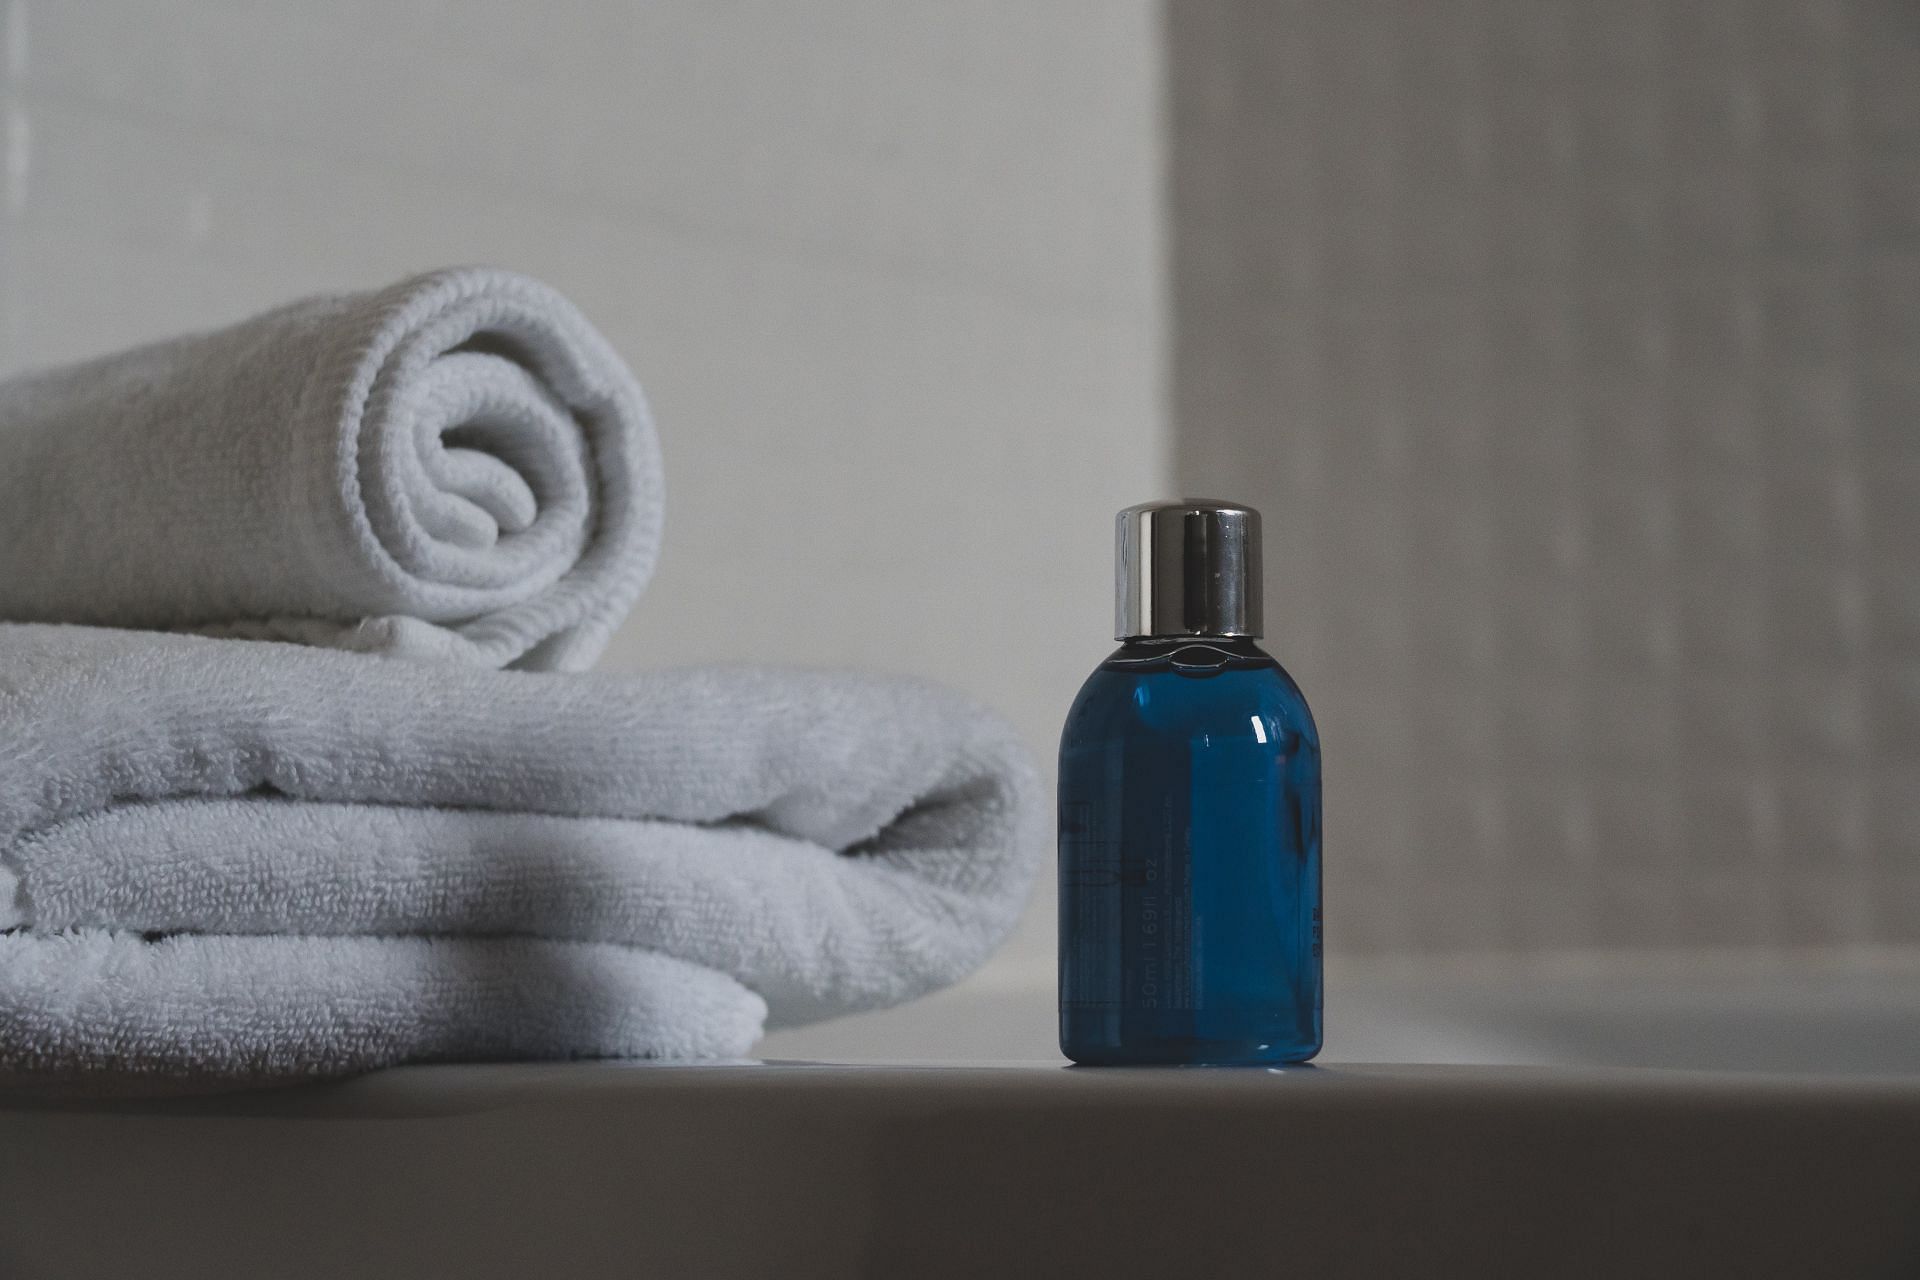 Benefits of a shower routine (image sourced via Pexels / Photo by castorly)